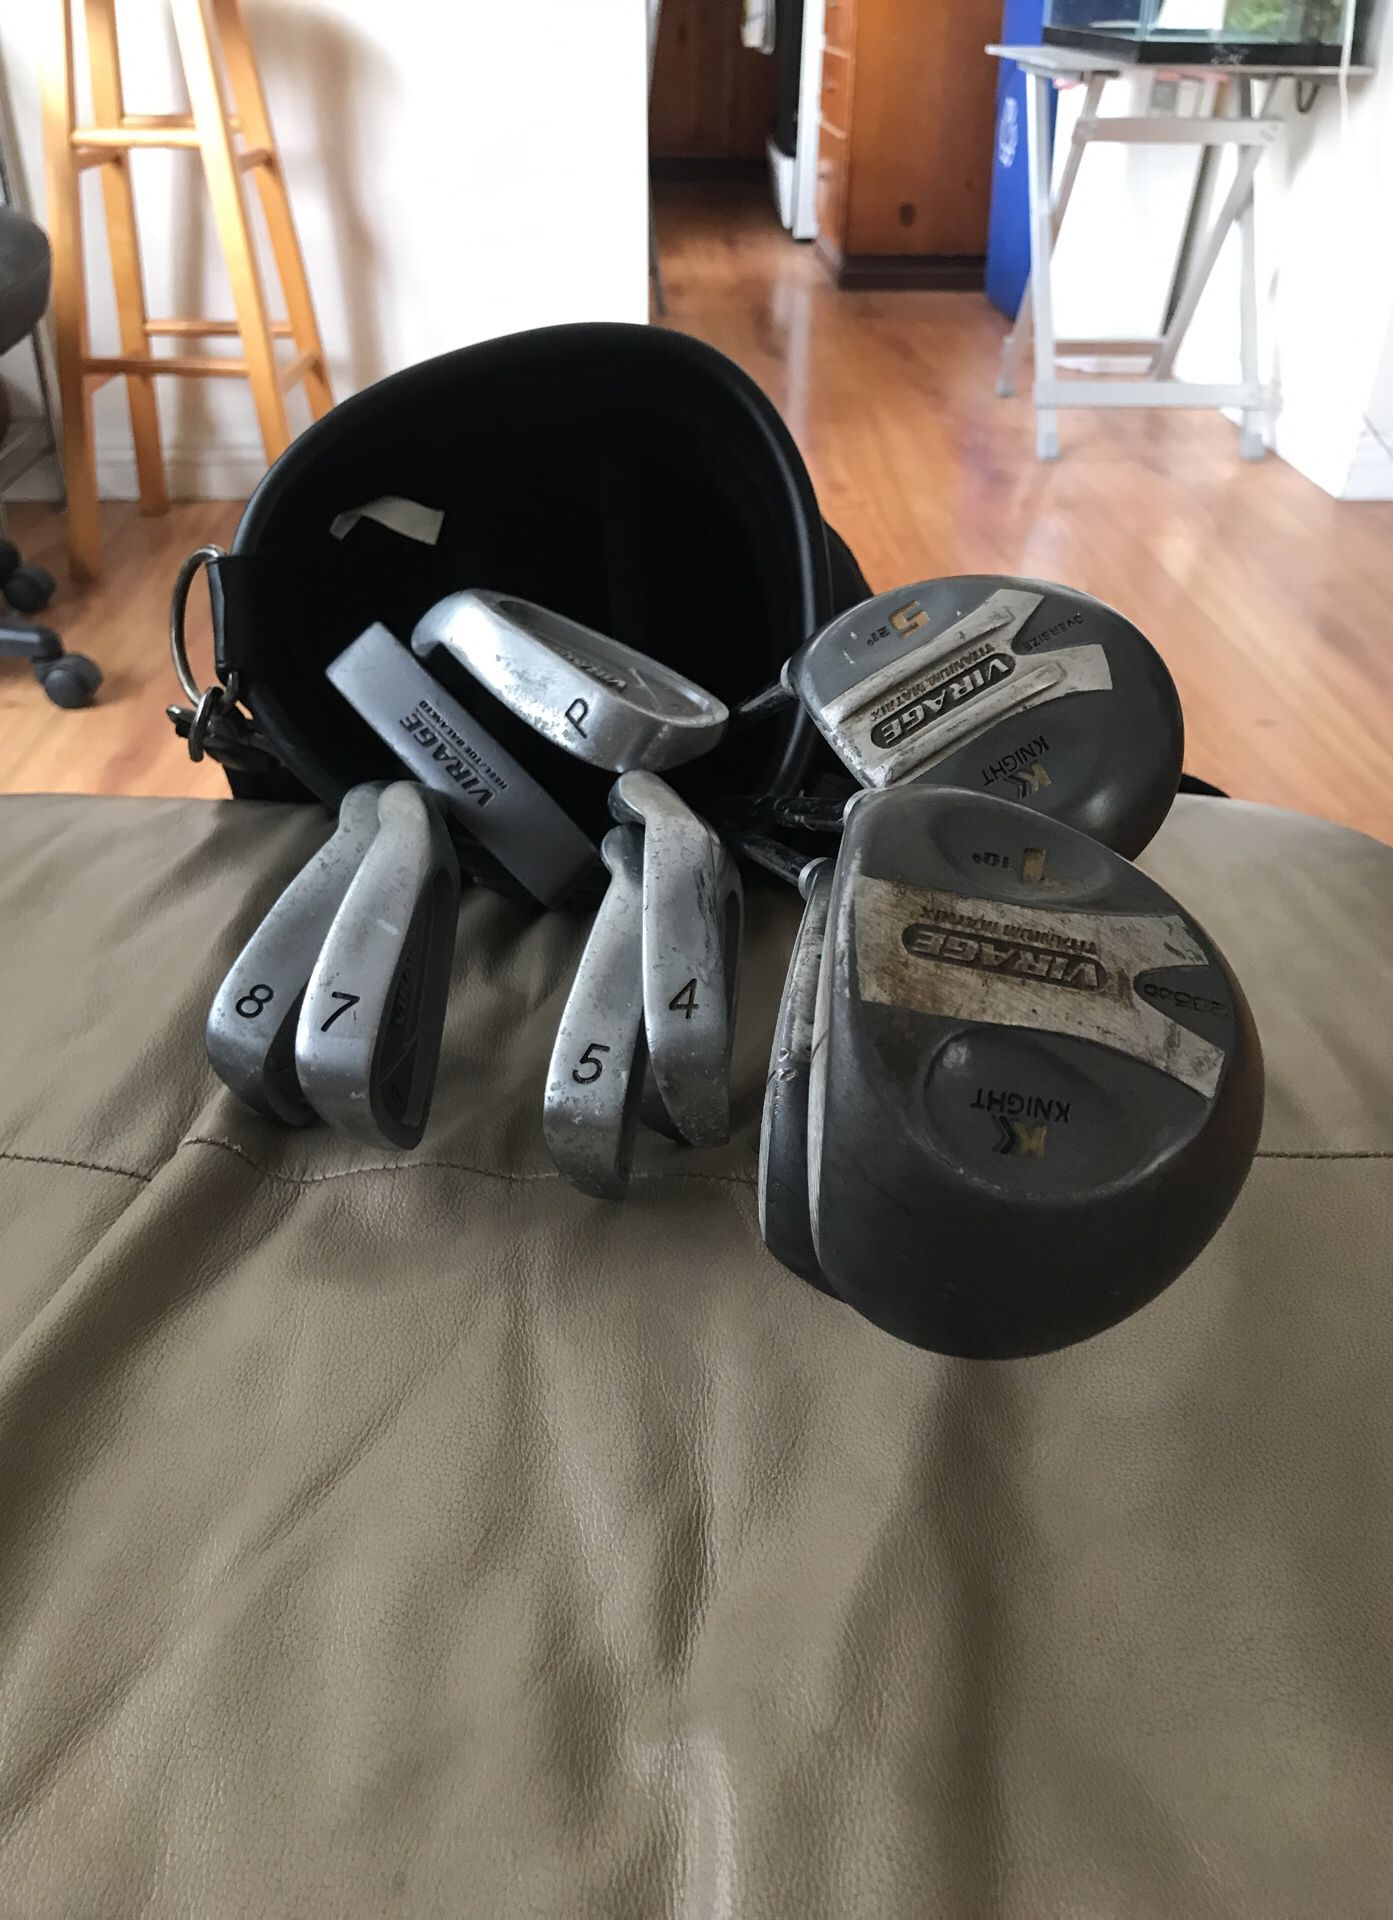 Set of gently used golf clubs with bag, cover and arm strap.